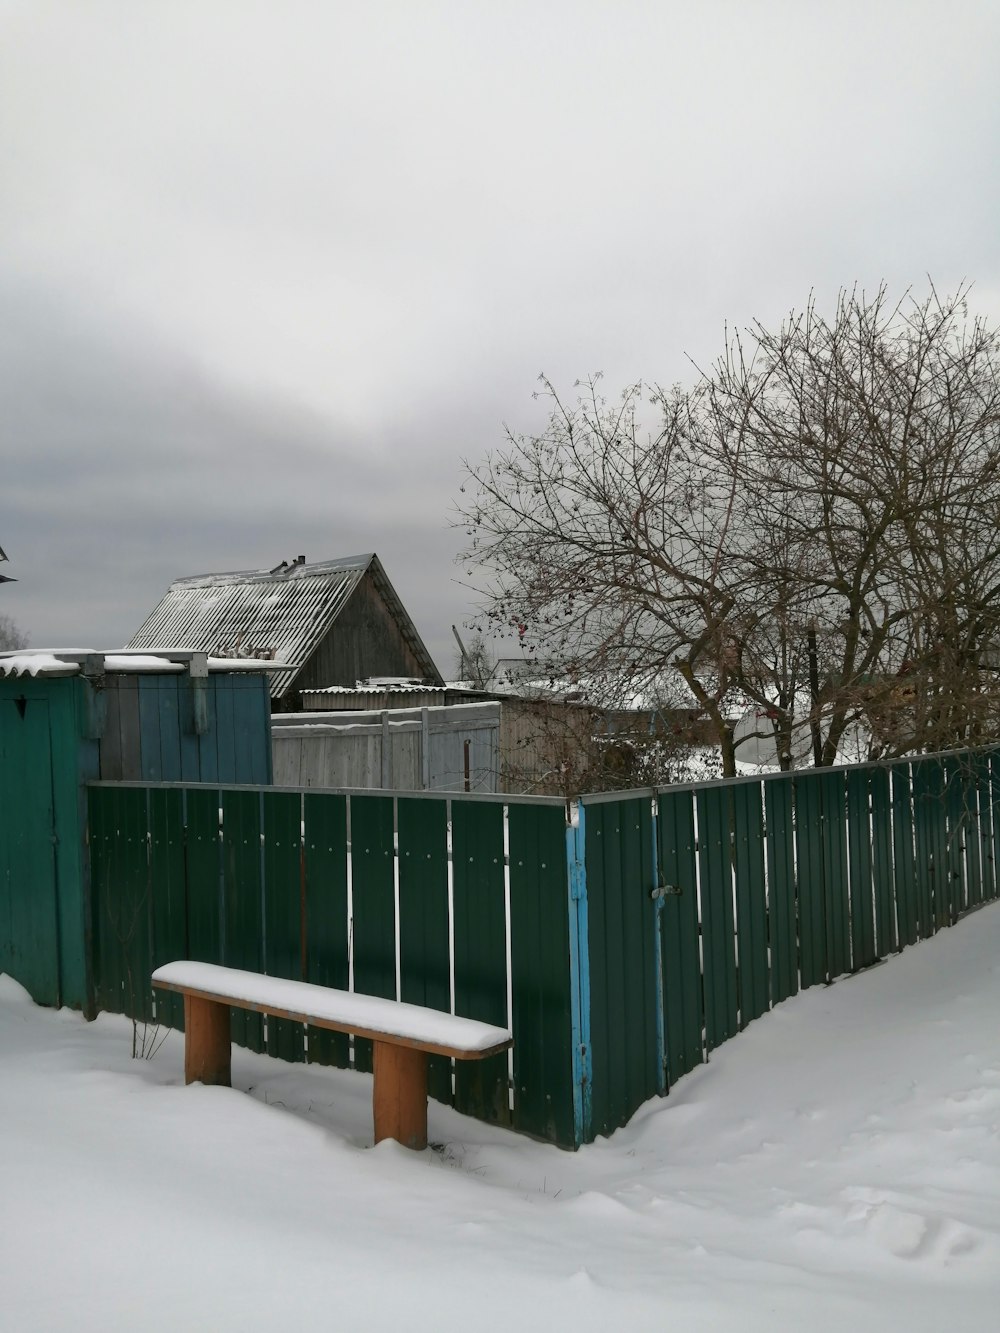 a snow covered park bench next to a fence